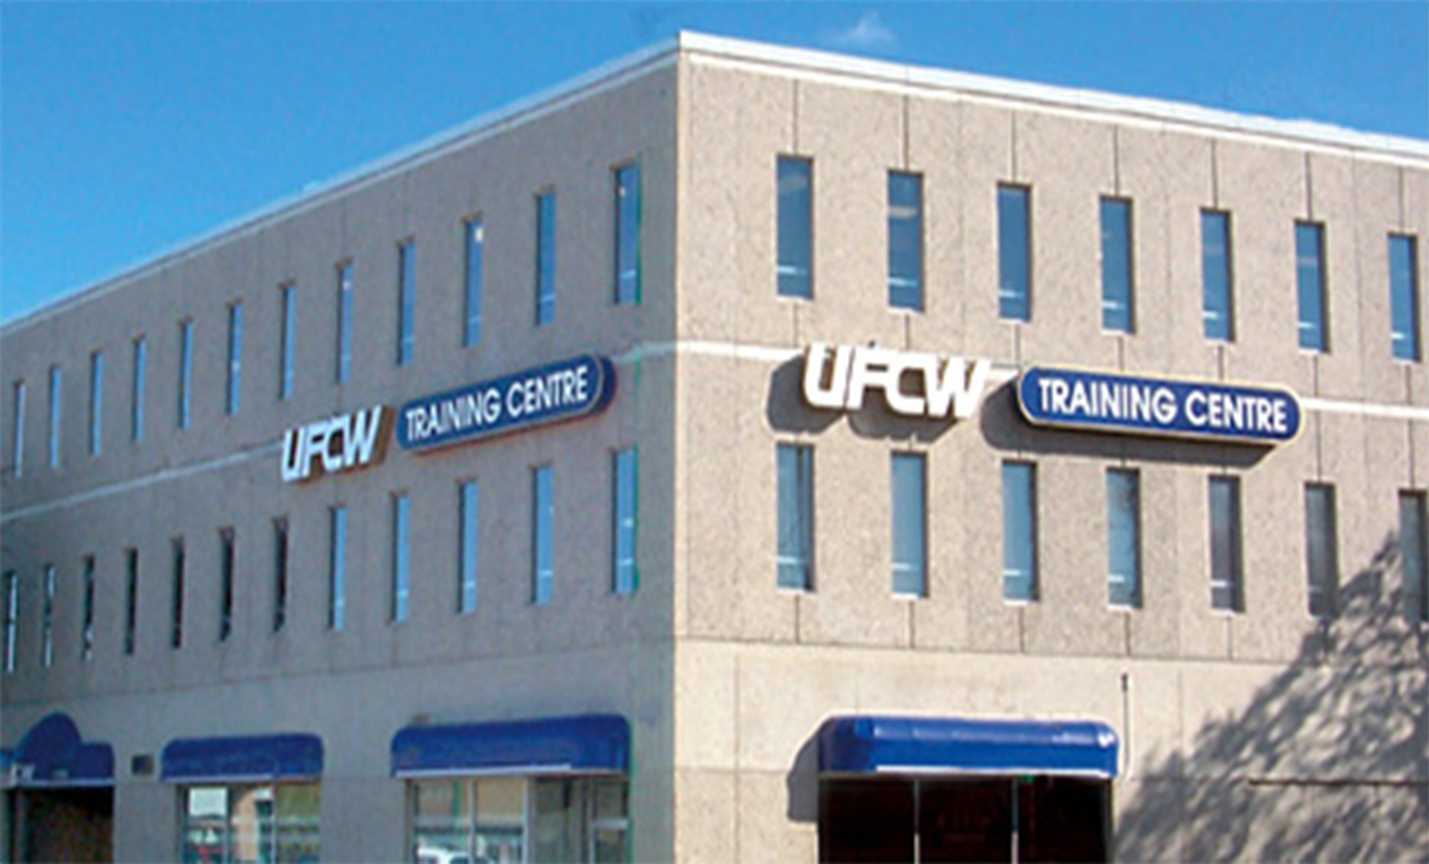 Exterior of three story building. White and blue sign: UFCW Training Centre. 